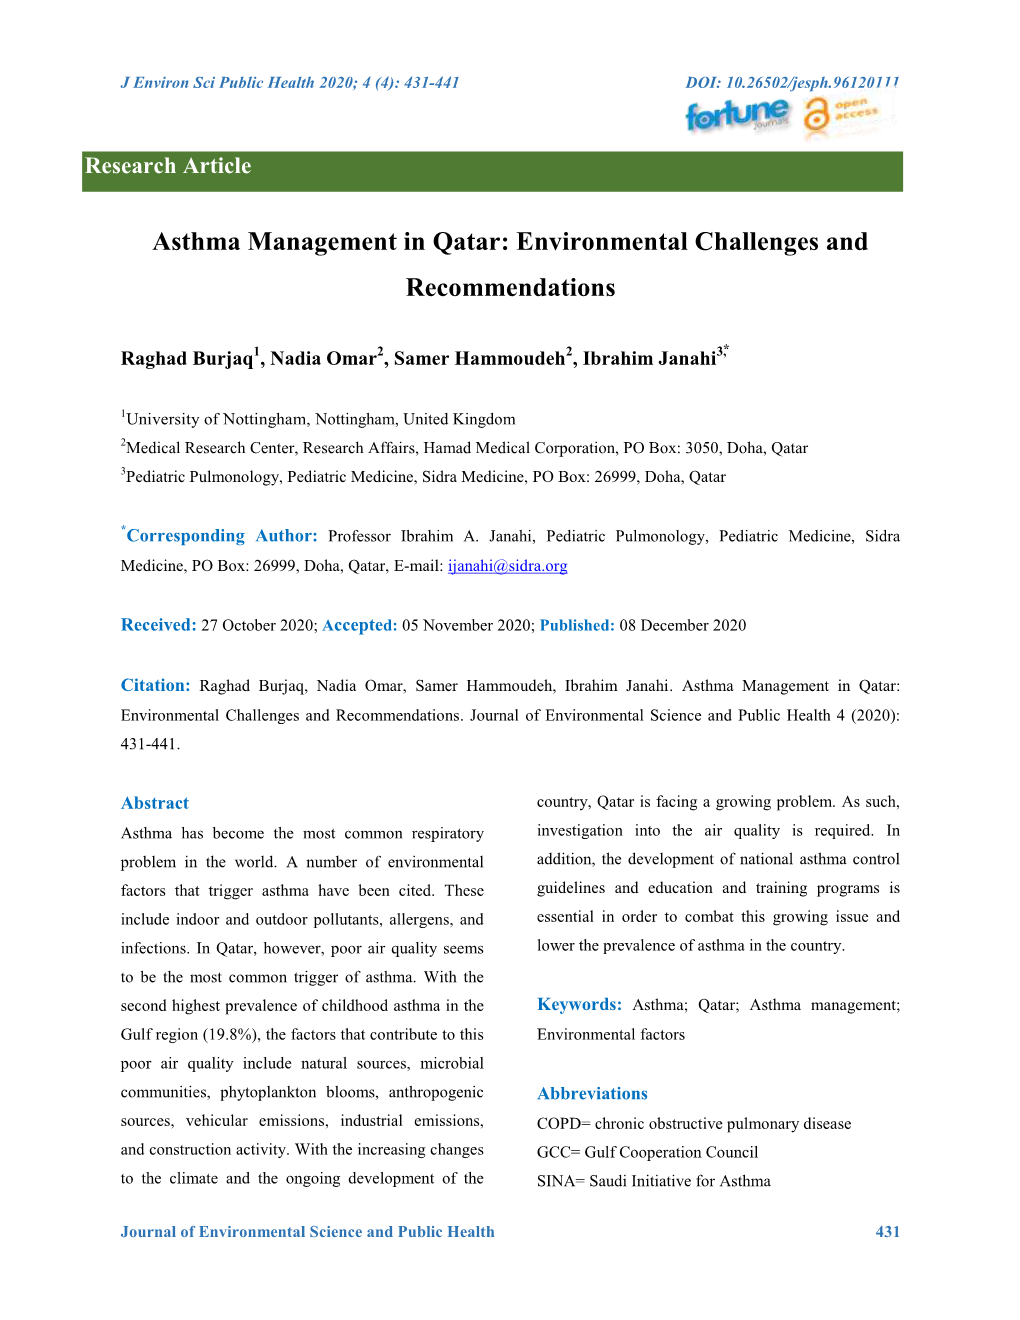 Asthma Management in Qatar: Environmental Challenges and Recommendations